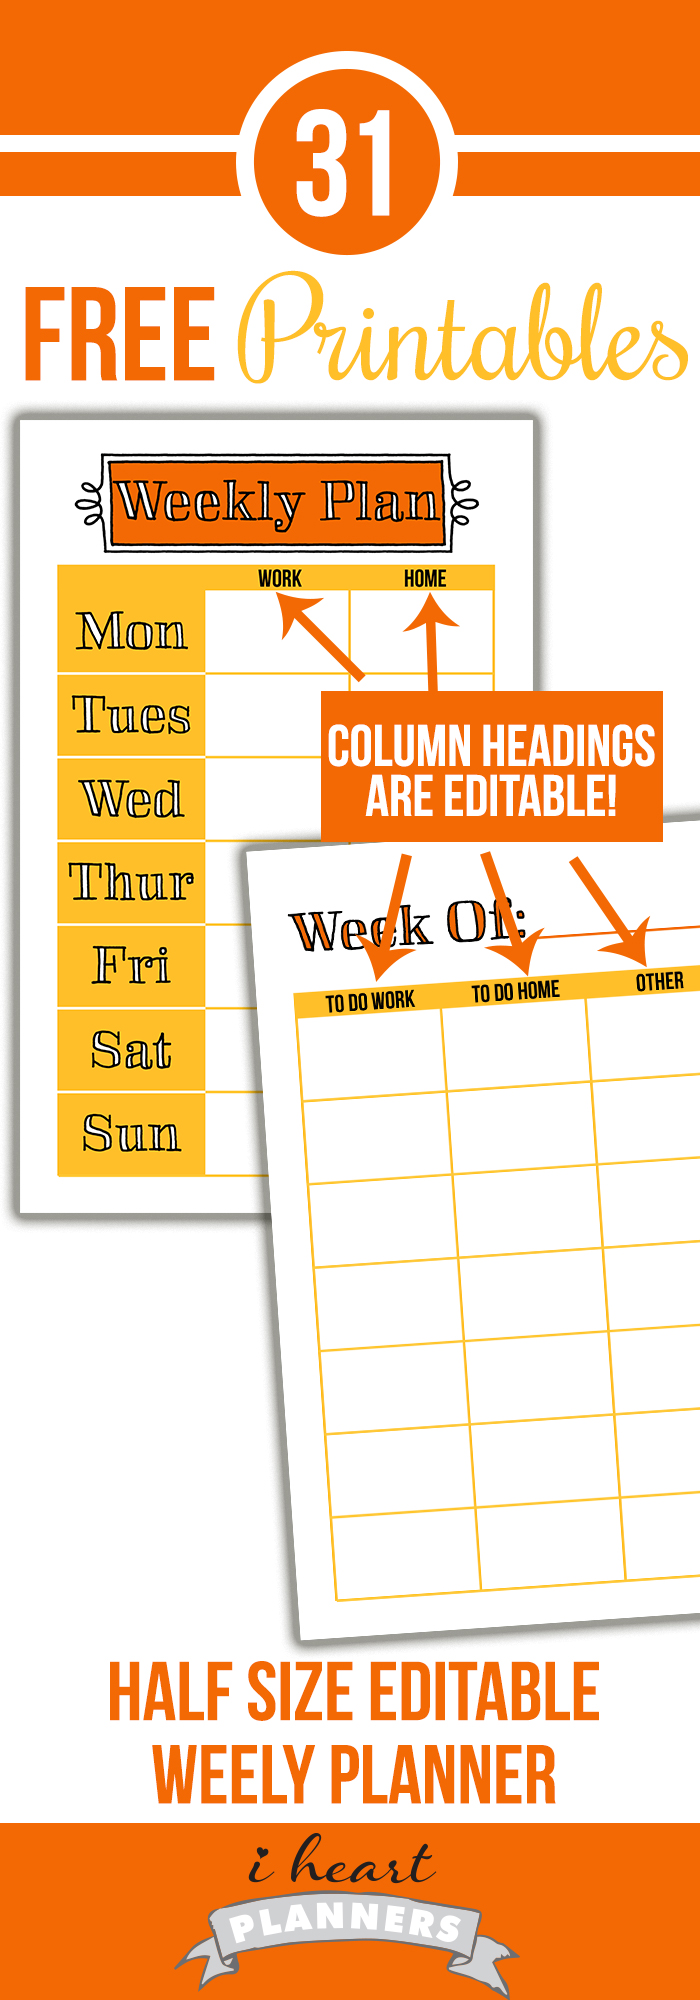 Editable weekly planner printable - you can edit each column to suit your needs! This is half letter size to fit well in junior discbound planners, A5 filofax planners, and more.